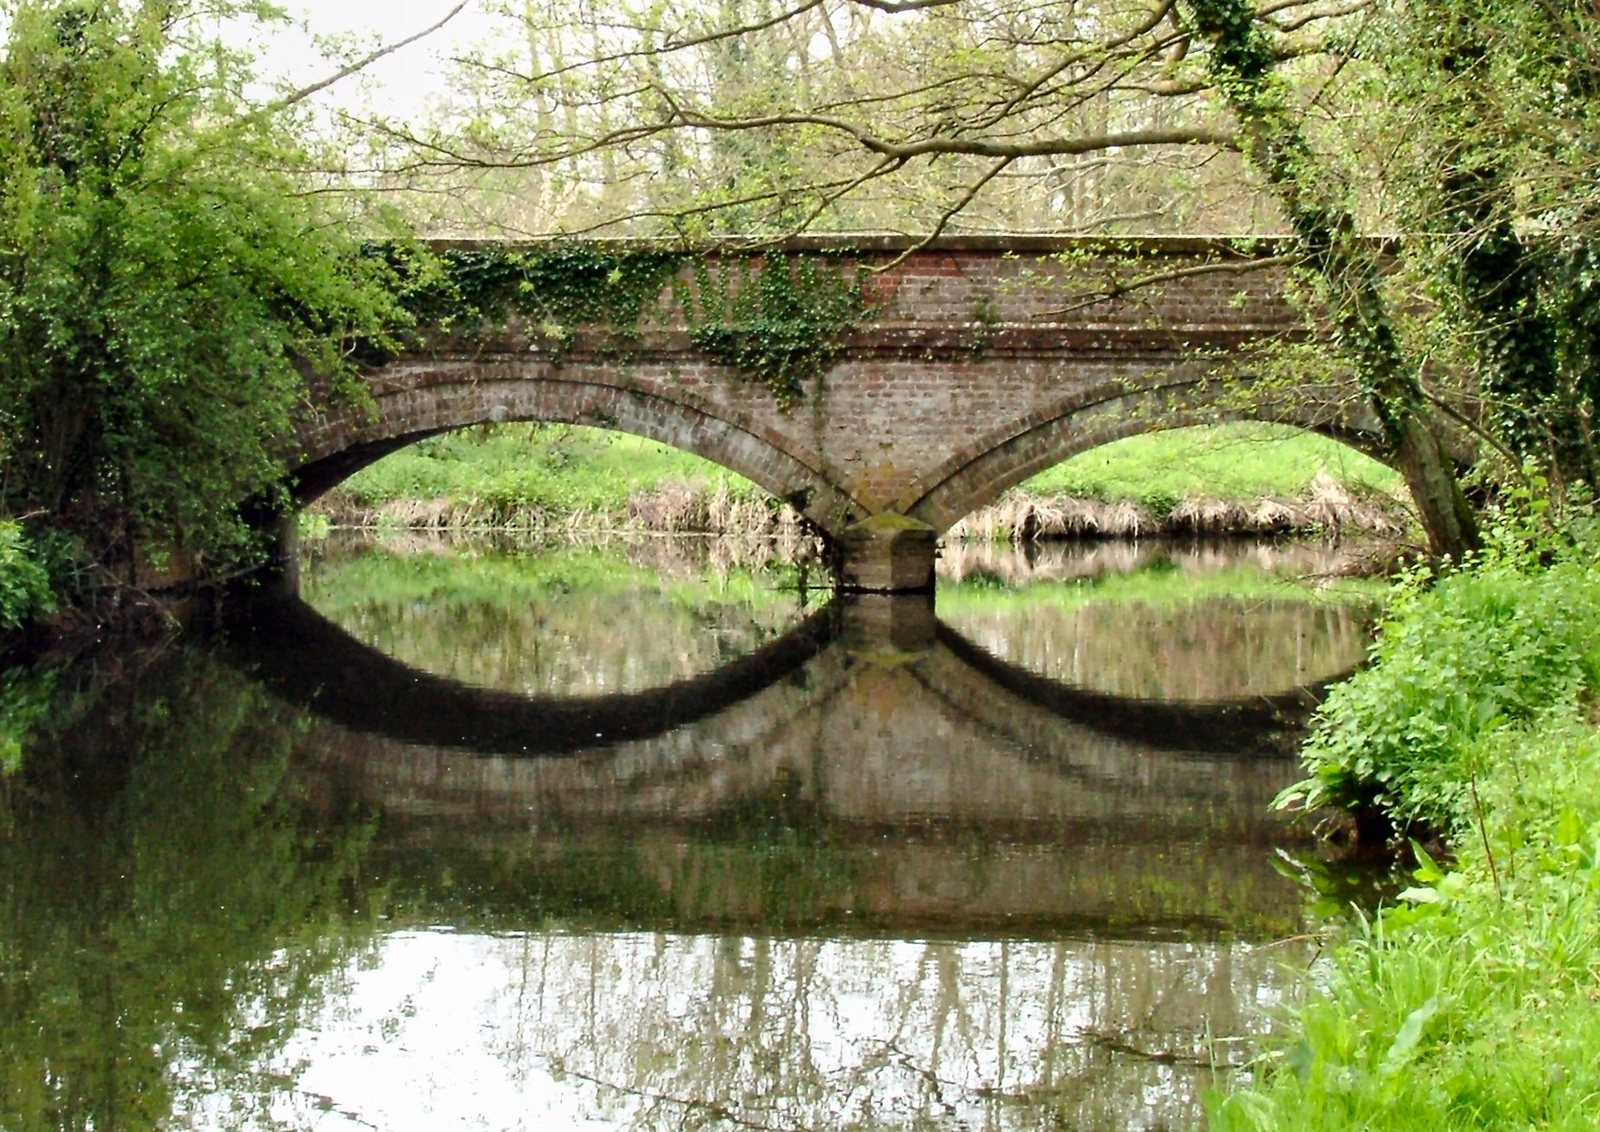 a stone bridge spanning the width of a river